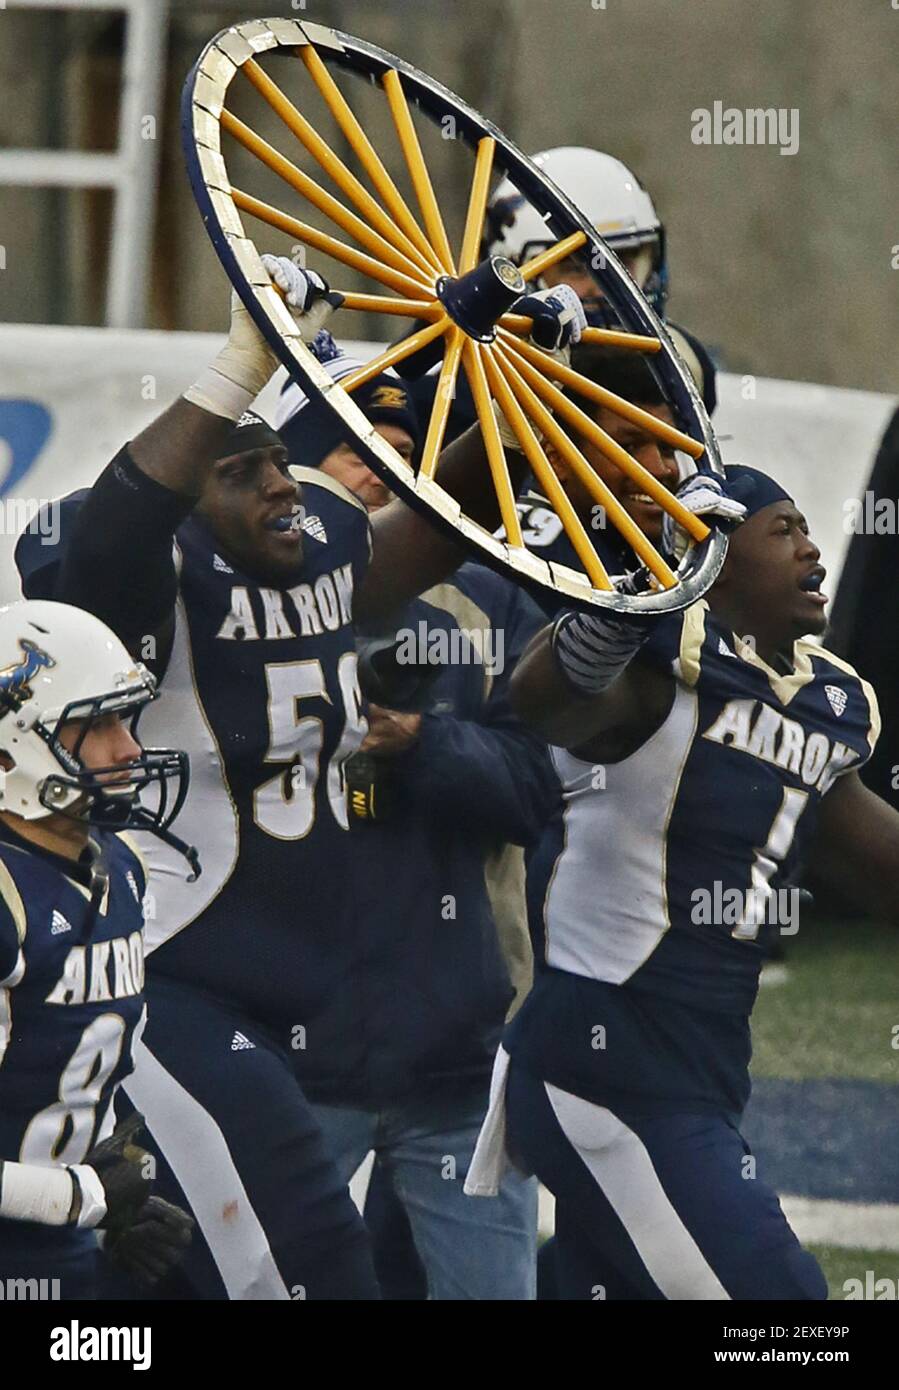 University of Akron football players Isaiah Williams, left, and Jatavis  Brown celebrate as the carry the Wagon Wheel trophy over to their fans in  the stands after the Zips' 20-0 victory against